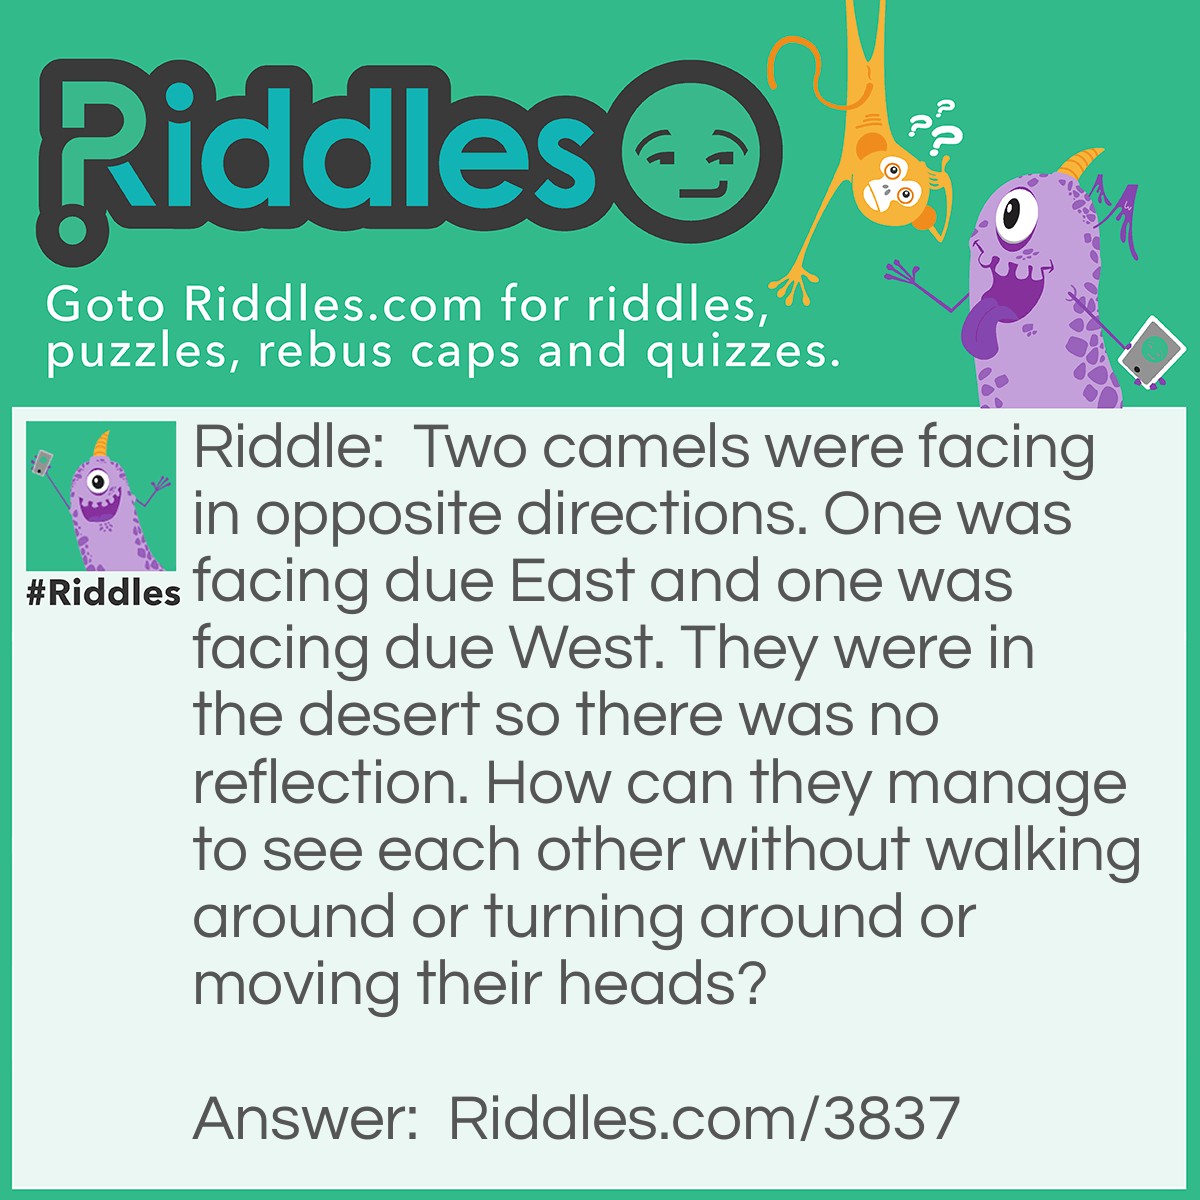 Riddle: Two camels were facing in opposite directions. One was facing due East and one was facing due West. They were in the desert so there was no reflection. How can they manage to see each other without walking around or turning around or moving their heads?  Answer: The two camels were facing each other the entire time. Hence facing in opposite directions.